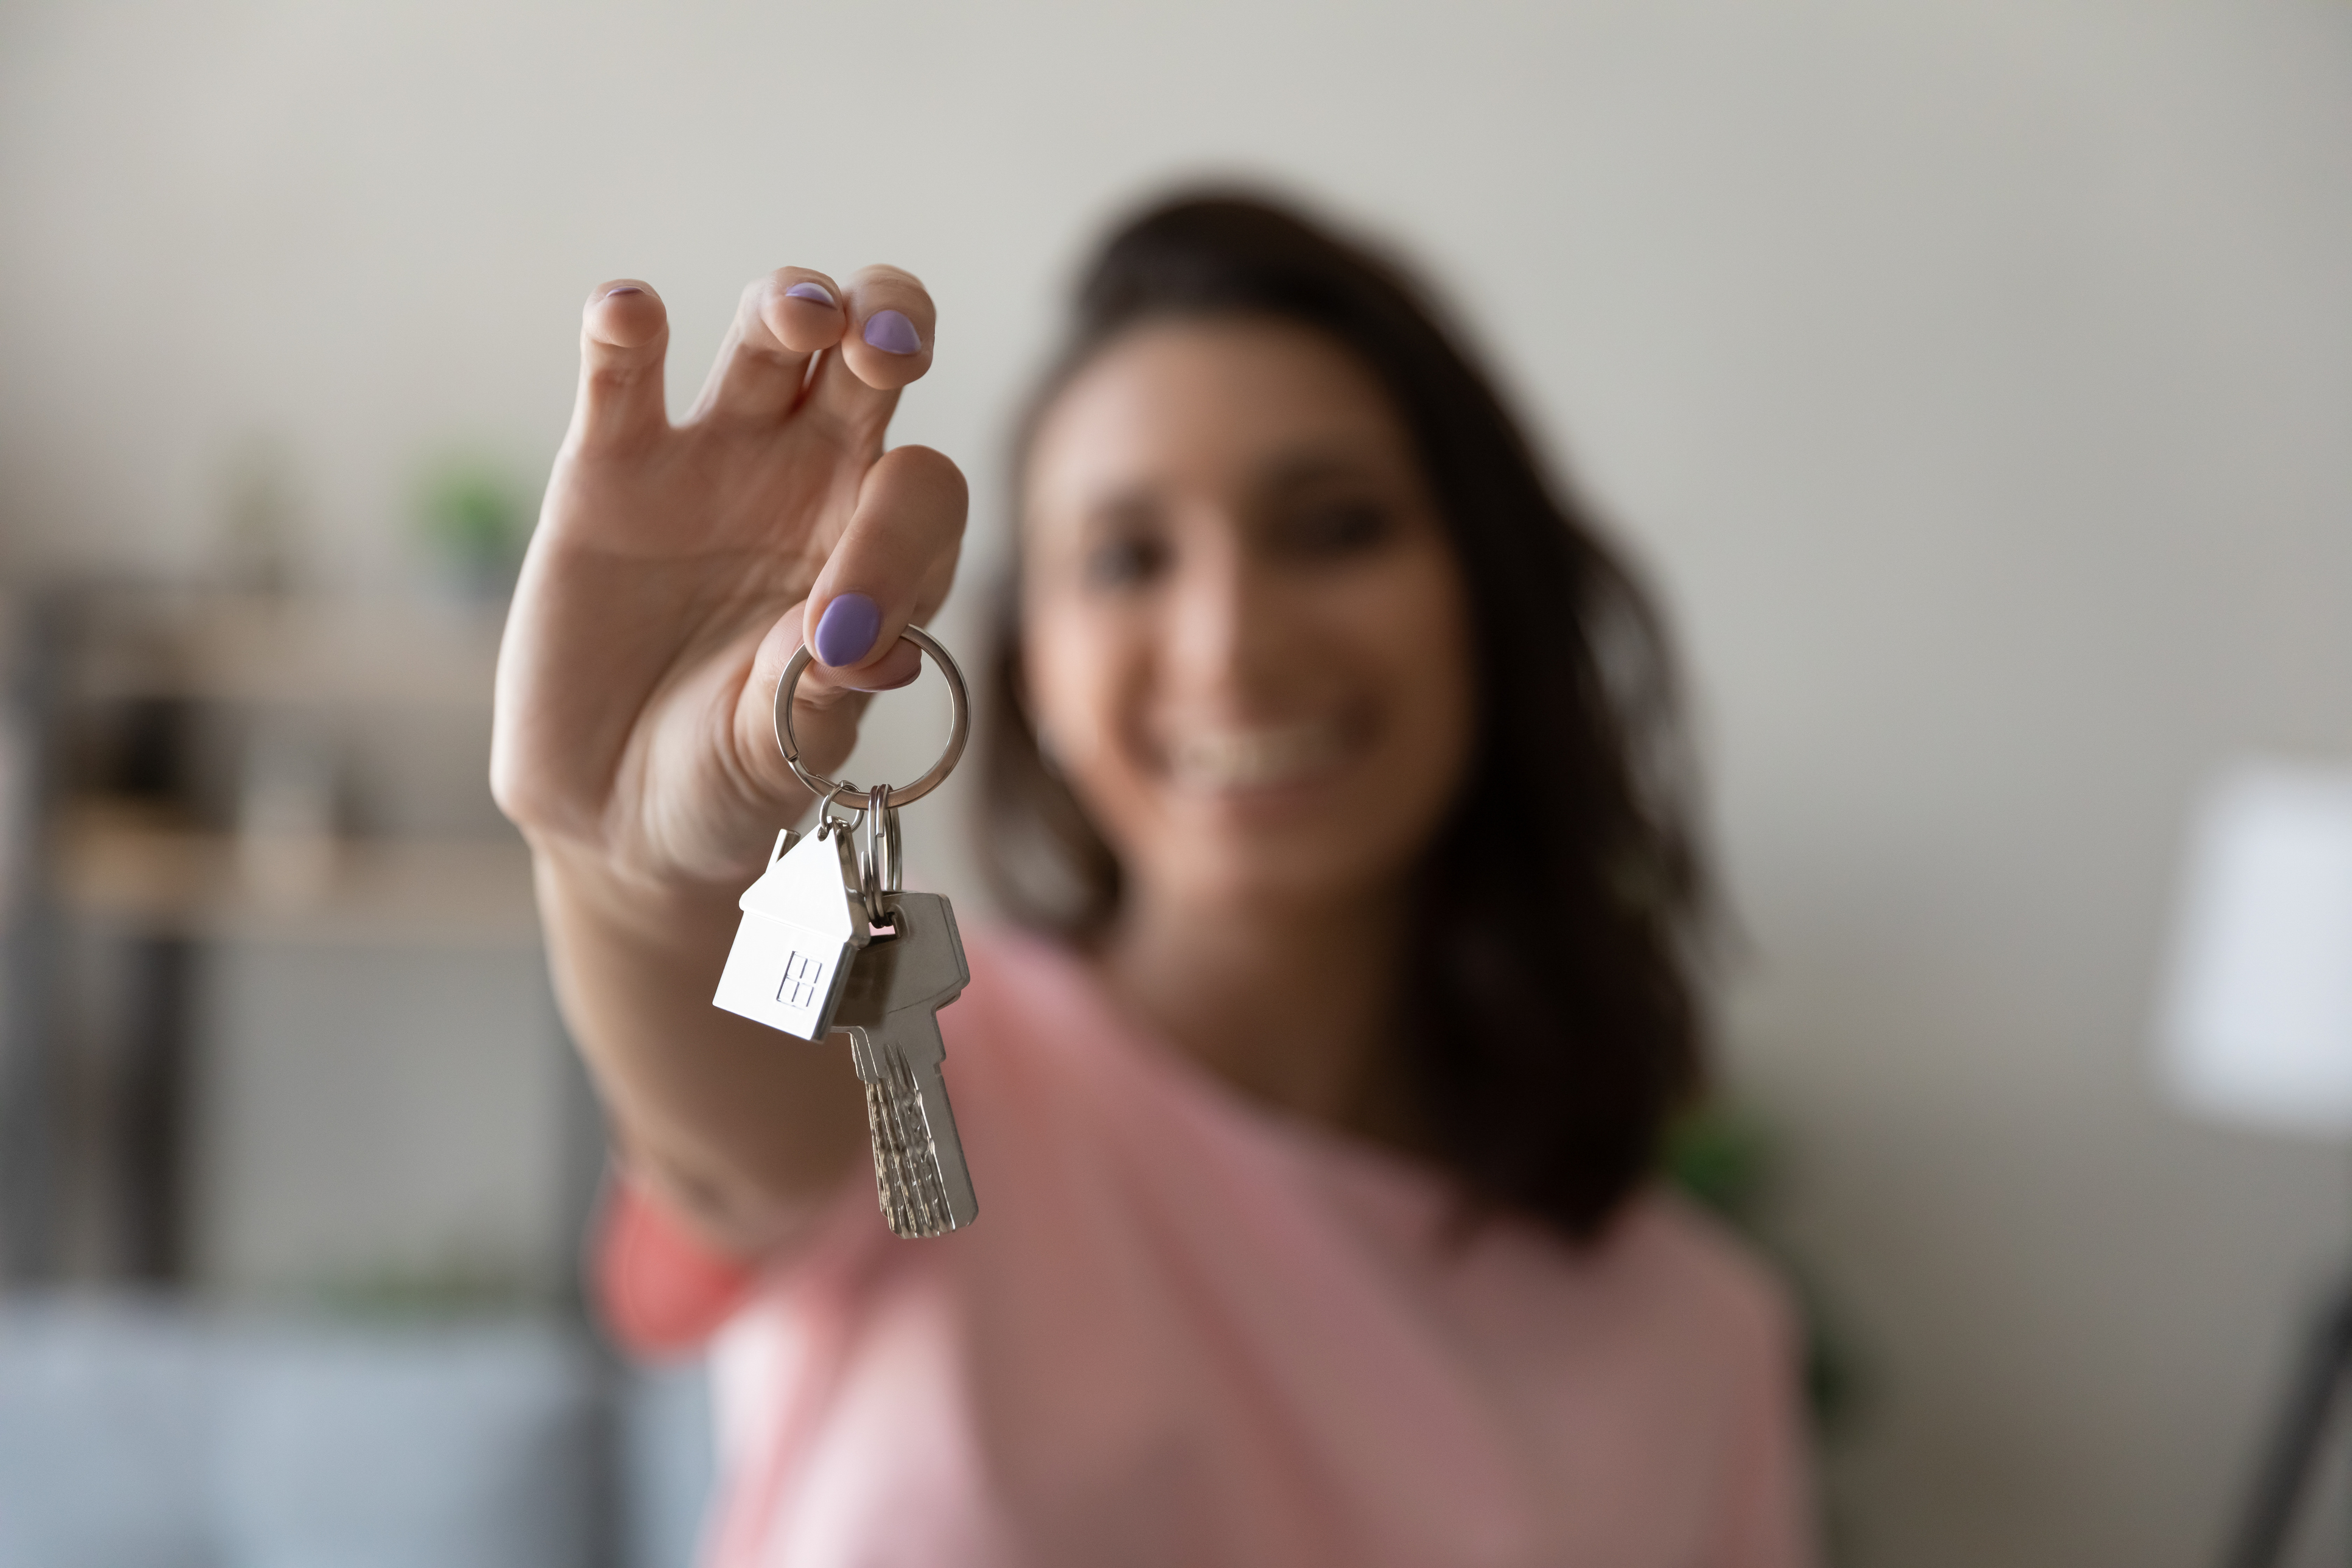 A woman holds up a house key with a house keychain attached.